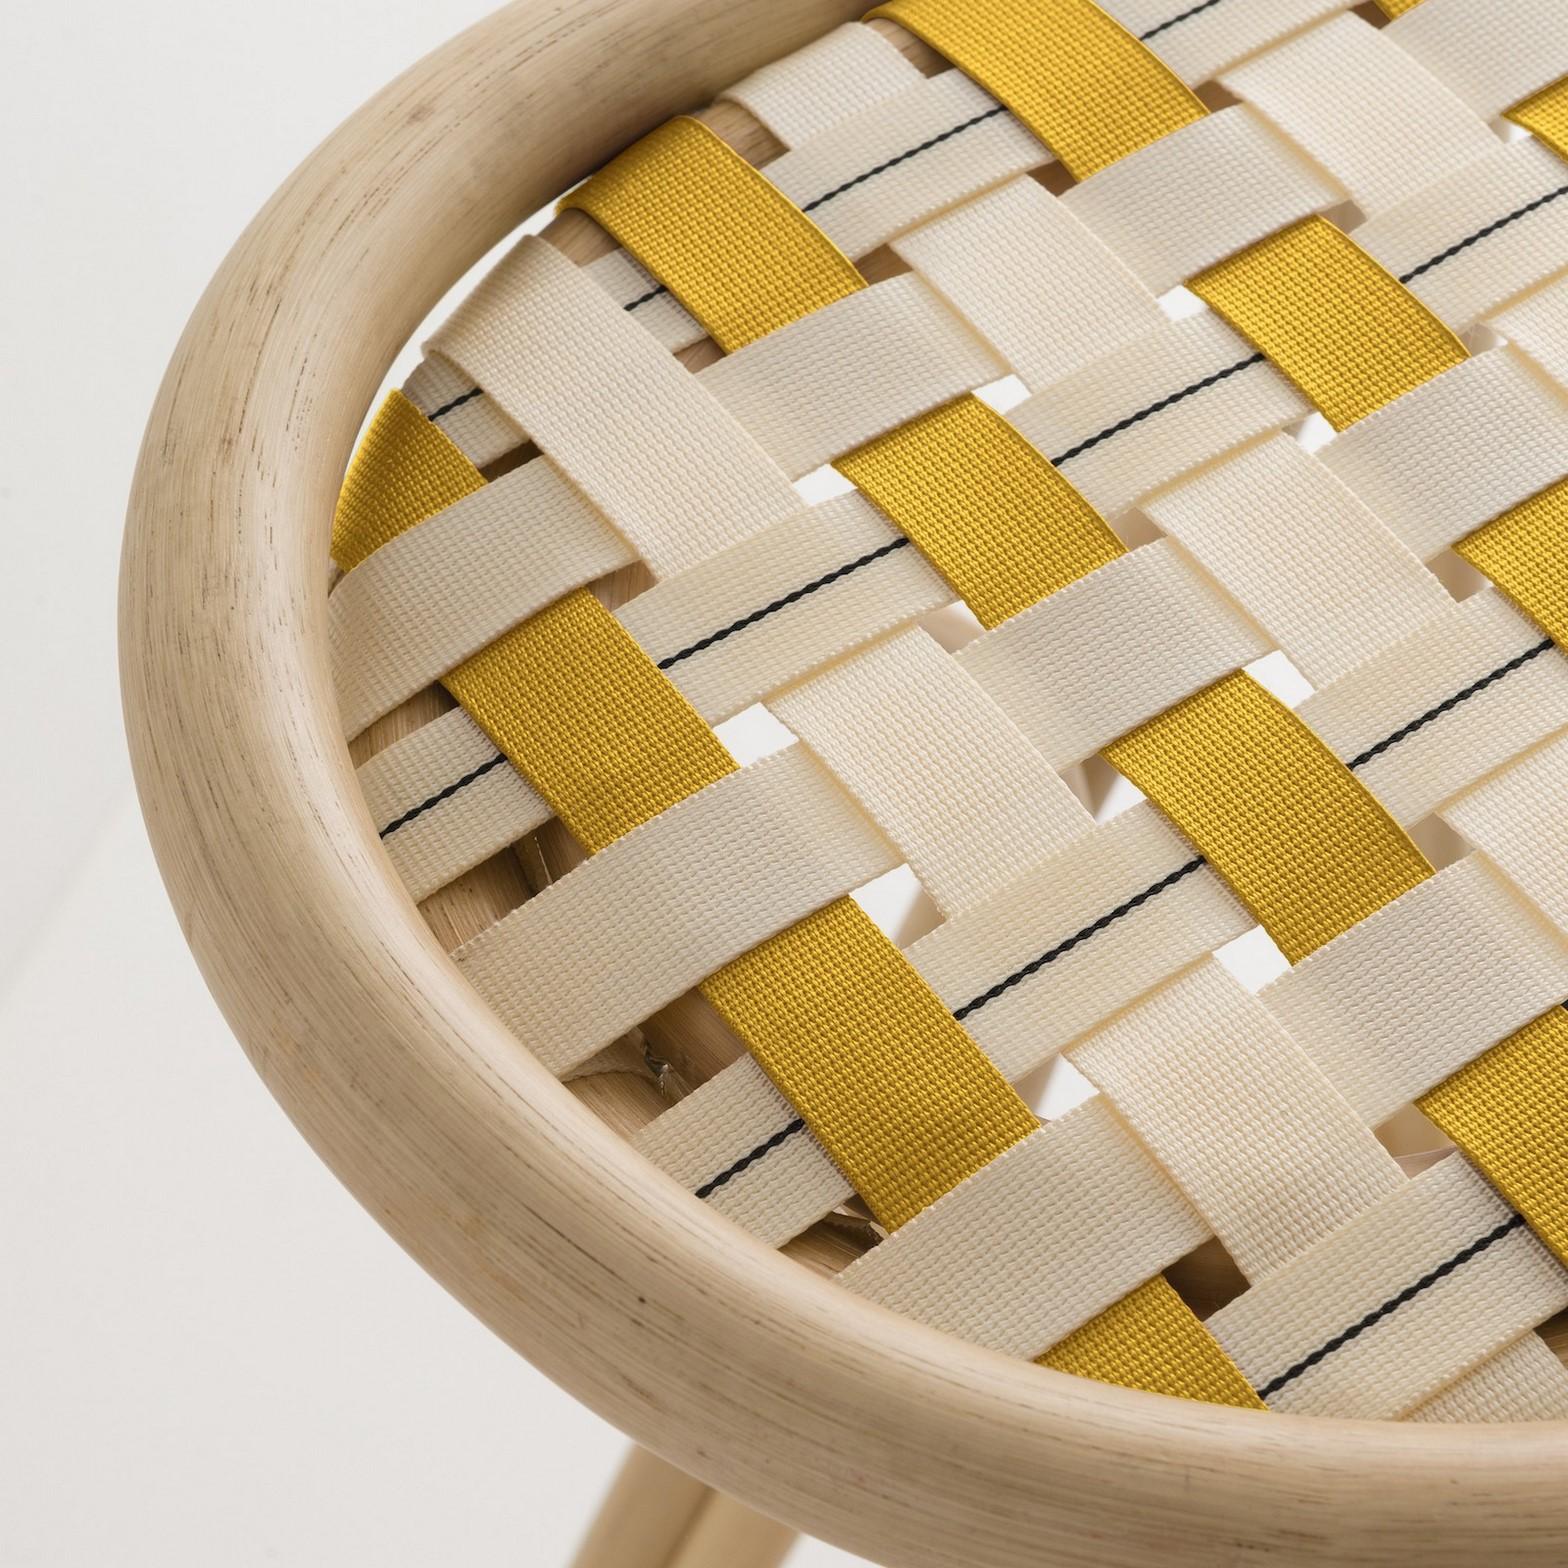 Combining modernity and tradition, design, graphic lines and timelessness this stool is composed of a robust rattan and airy structure, a black metal footrest and handbraided fabric canva stripes seat.